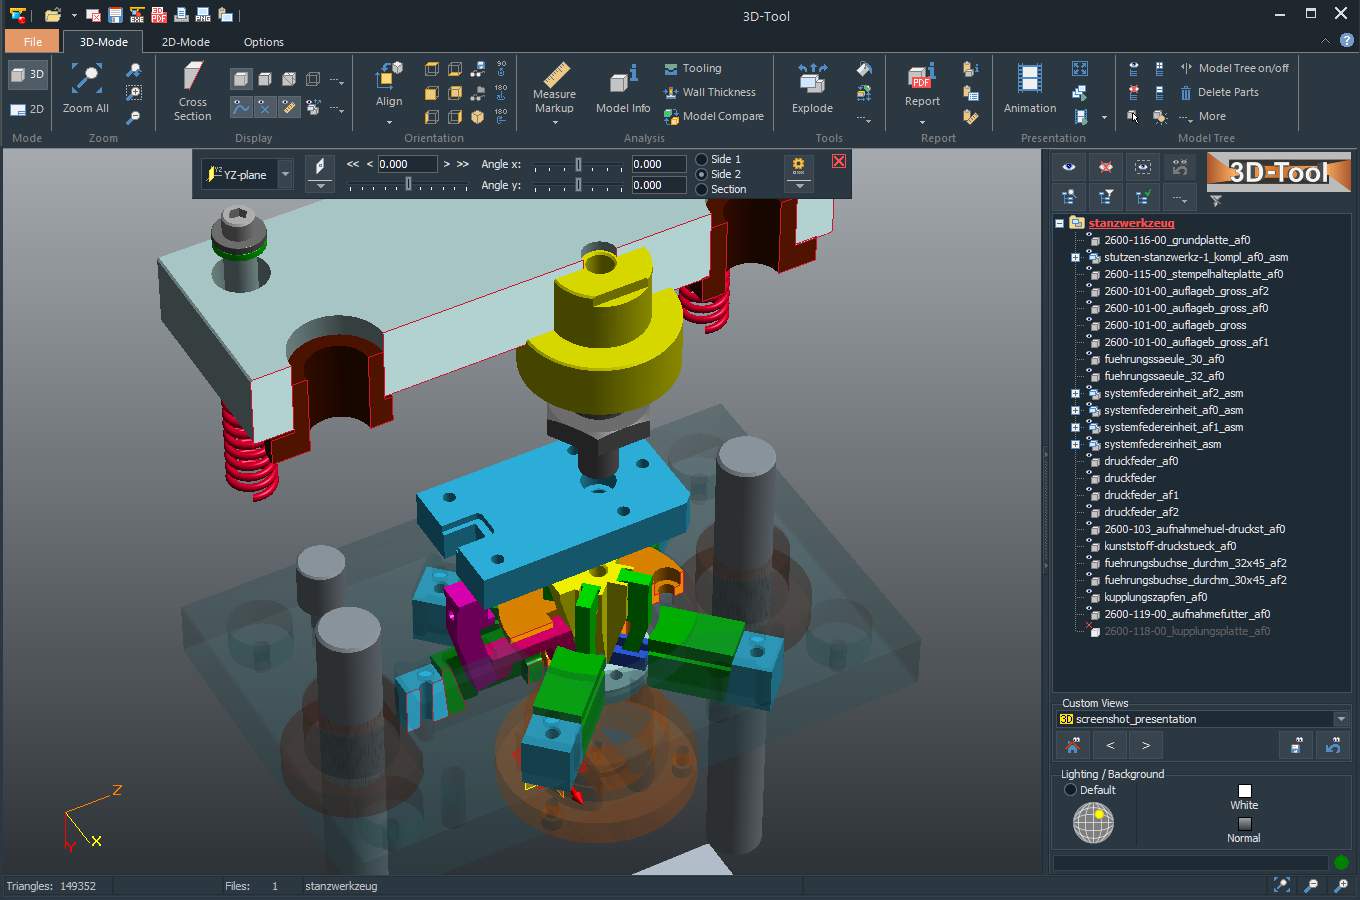 Presentation of 3D CAD models with the 3D-Tool CAD Viewer